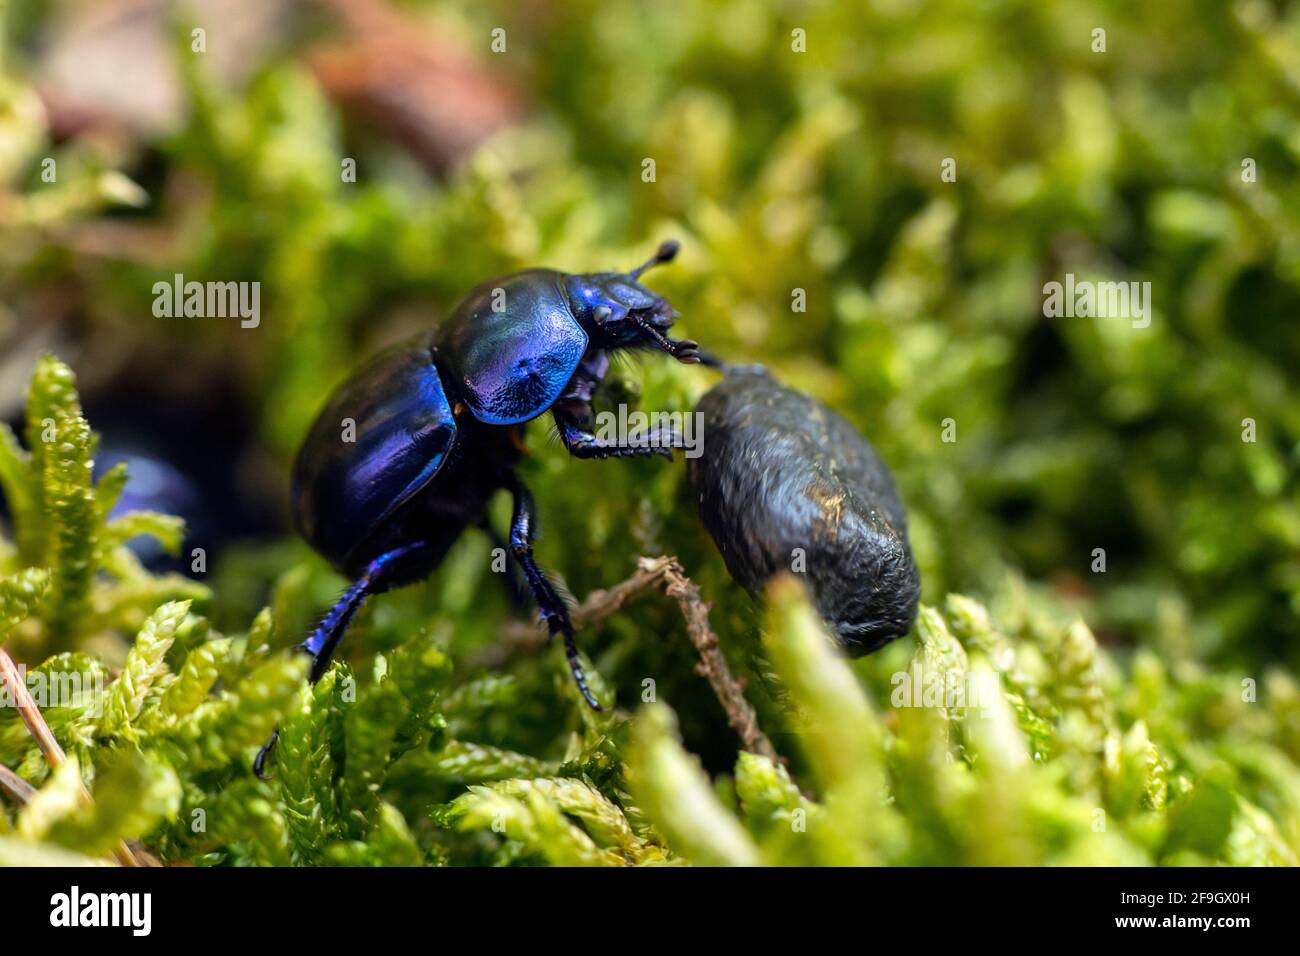 Dung beetle (Anoplotrupes stercorosus) rolling dung, Mecklenburg, Germany Stock Photo